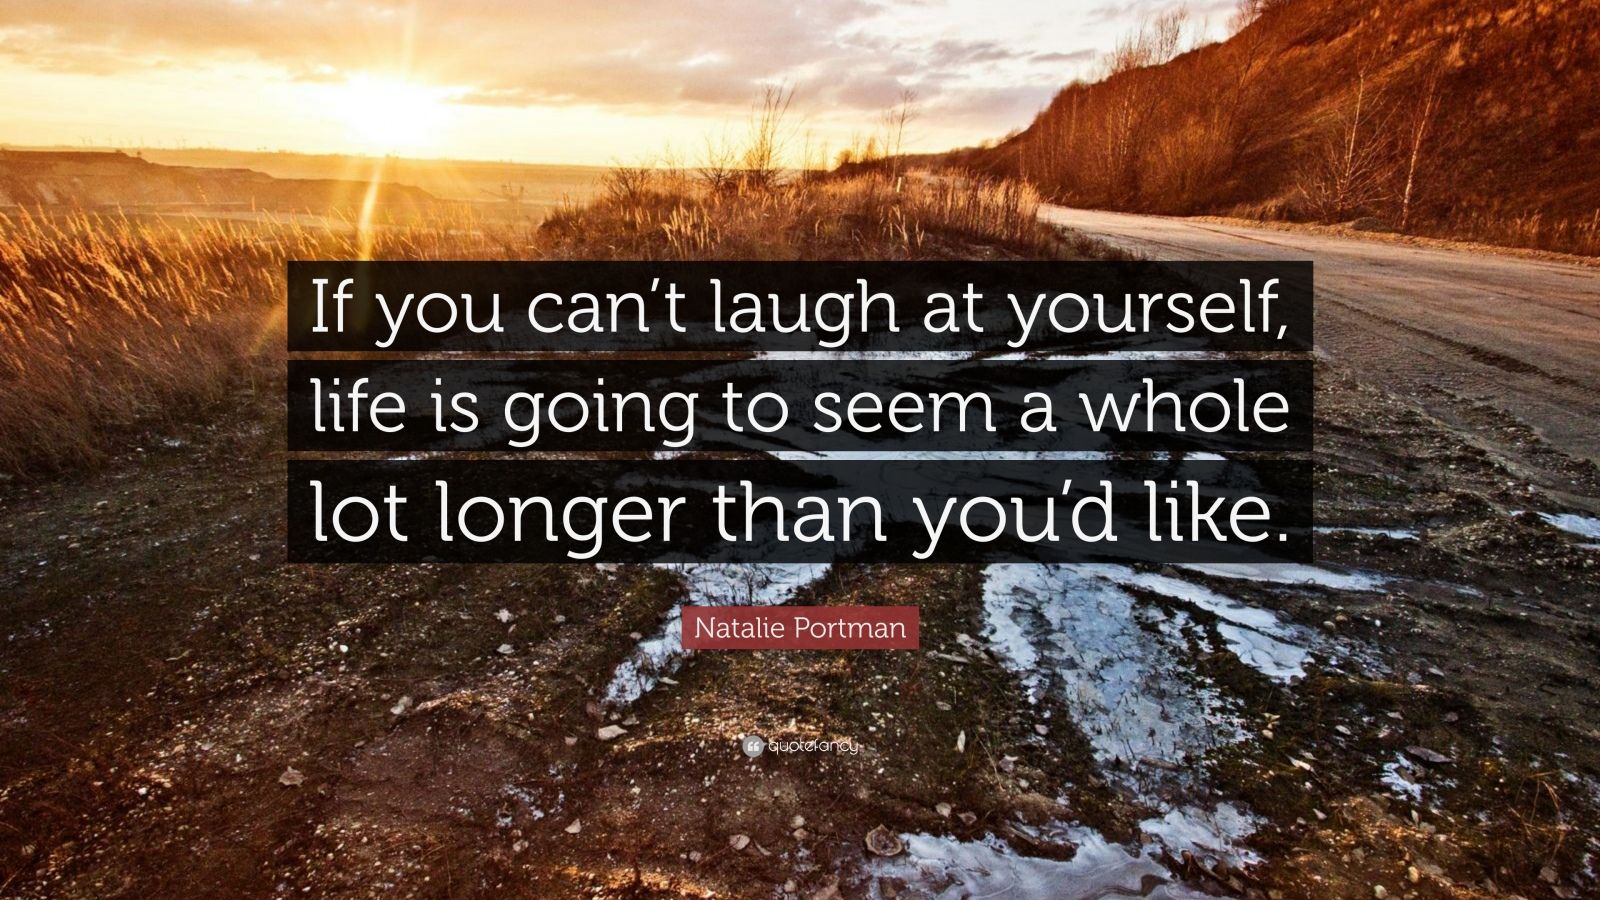 Natalie Portman Quote: “If you can’t laugh at yourself, life is going ...